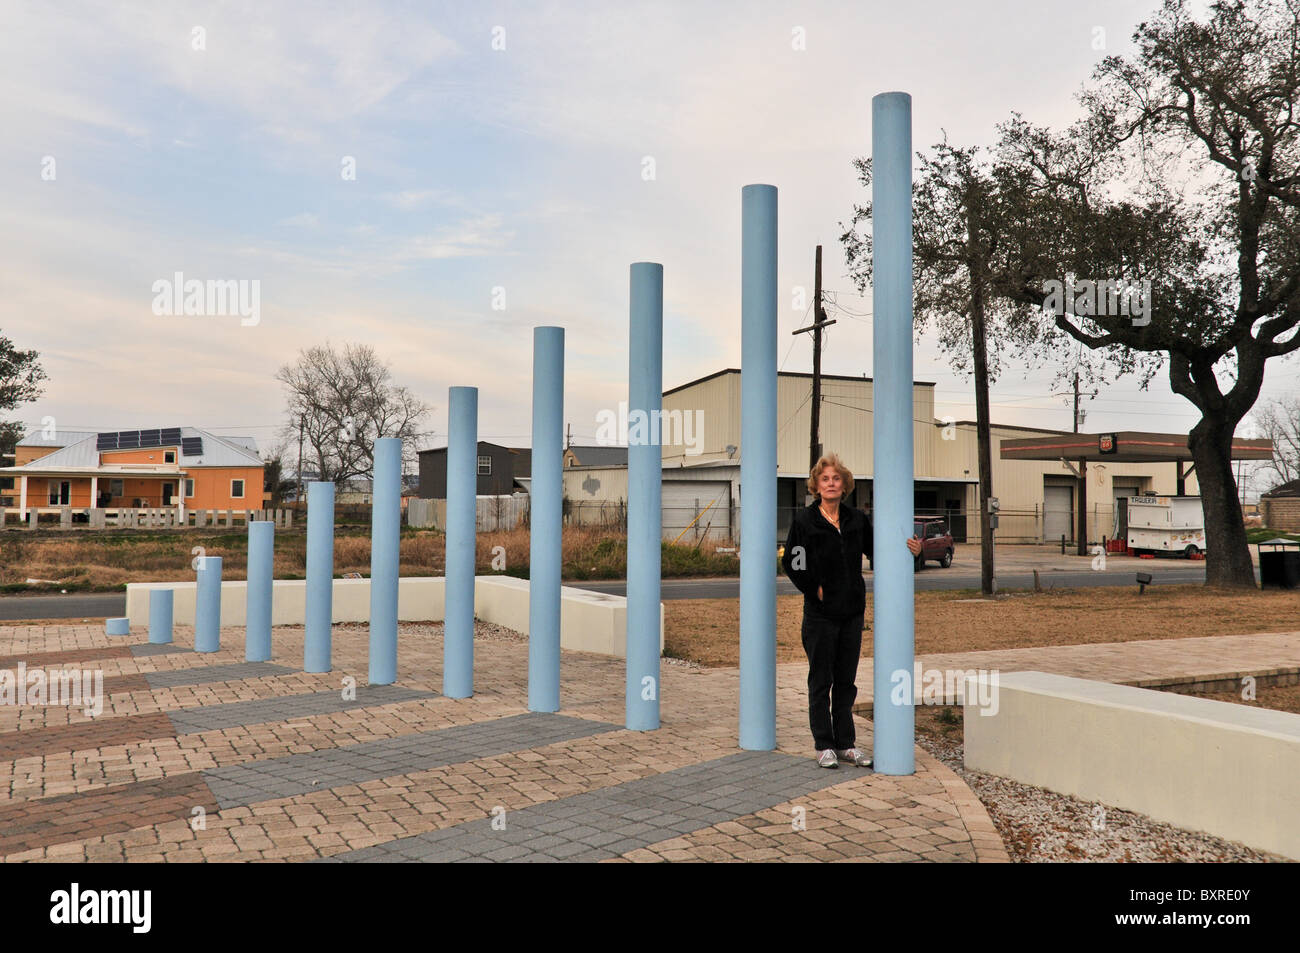 Display in park showing final height of flood waters in Lower Ninth Ward during Hurricane Katrina flood, New Orleans, Louisiana Stock Photo